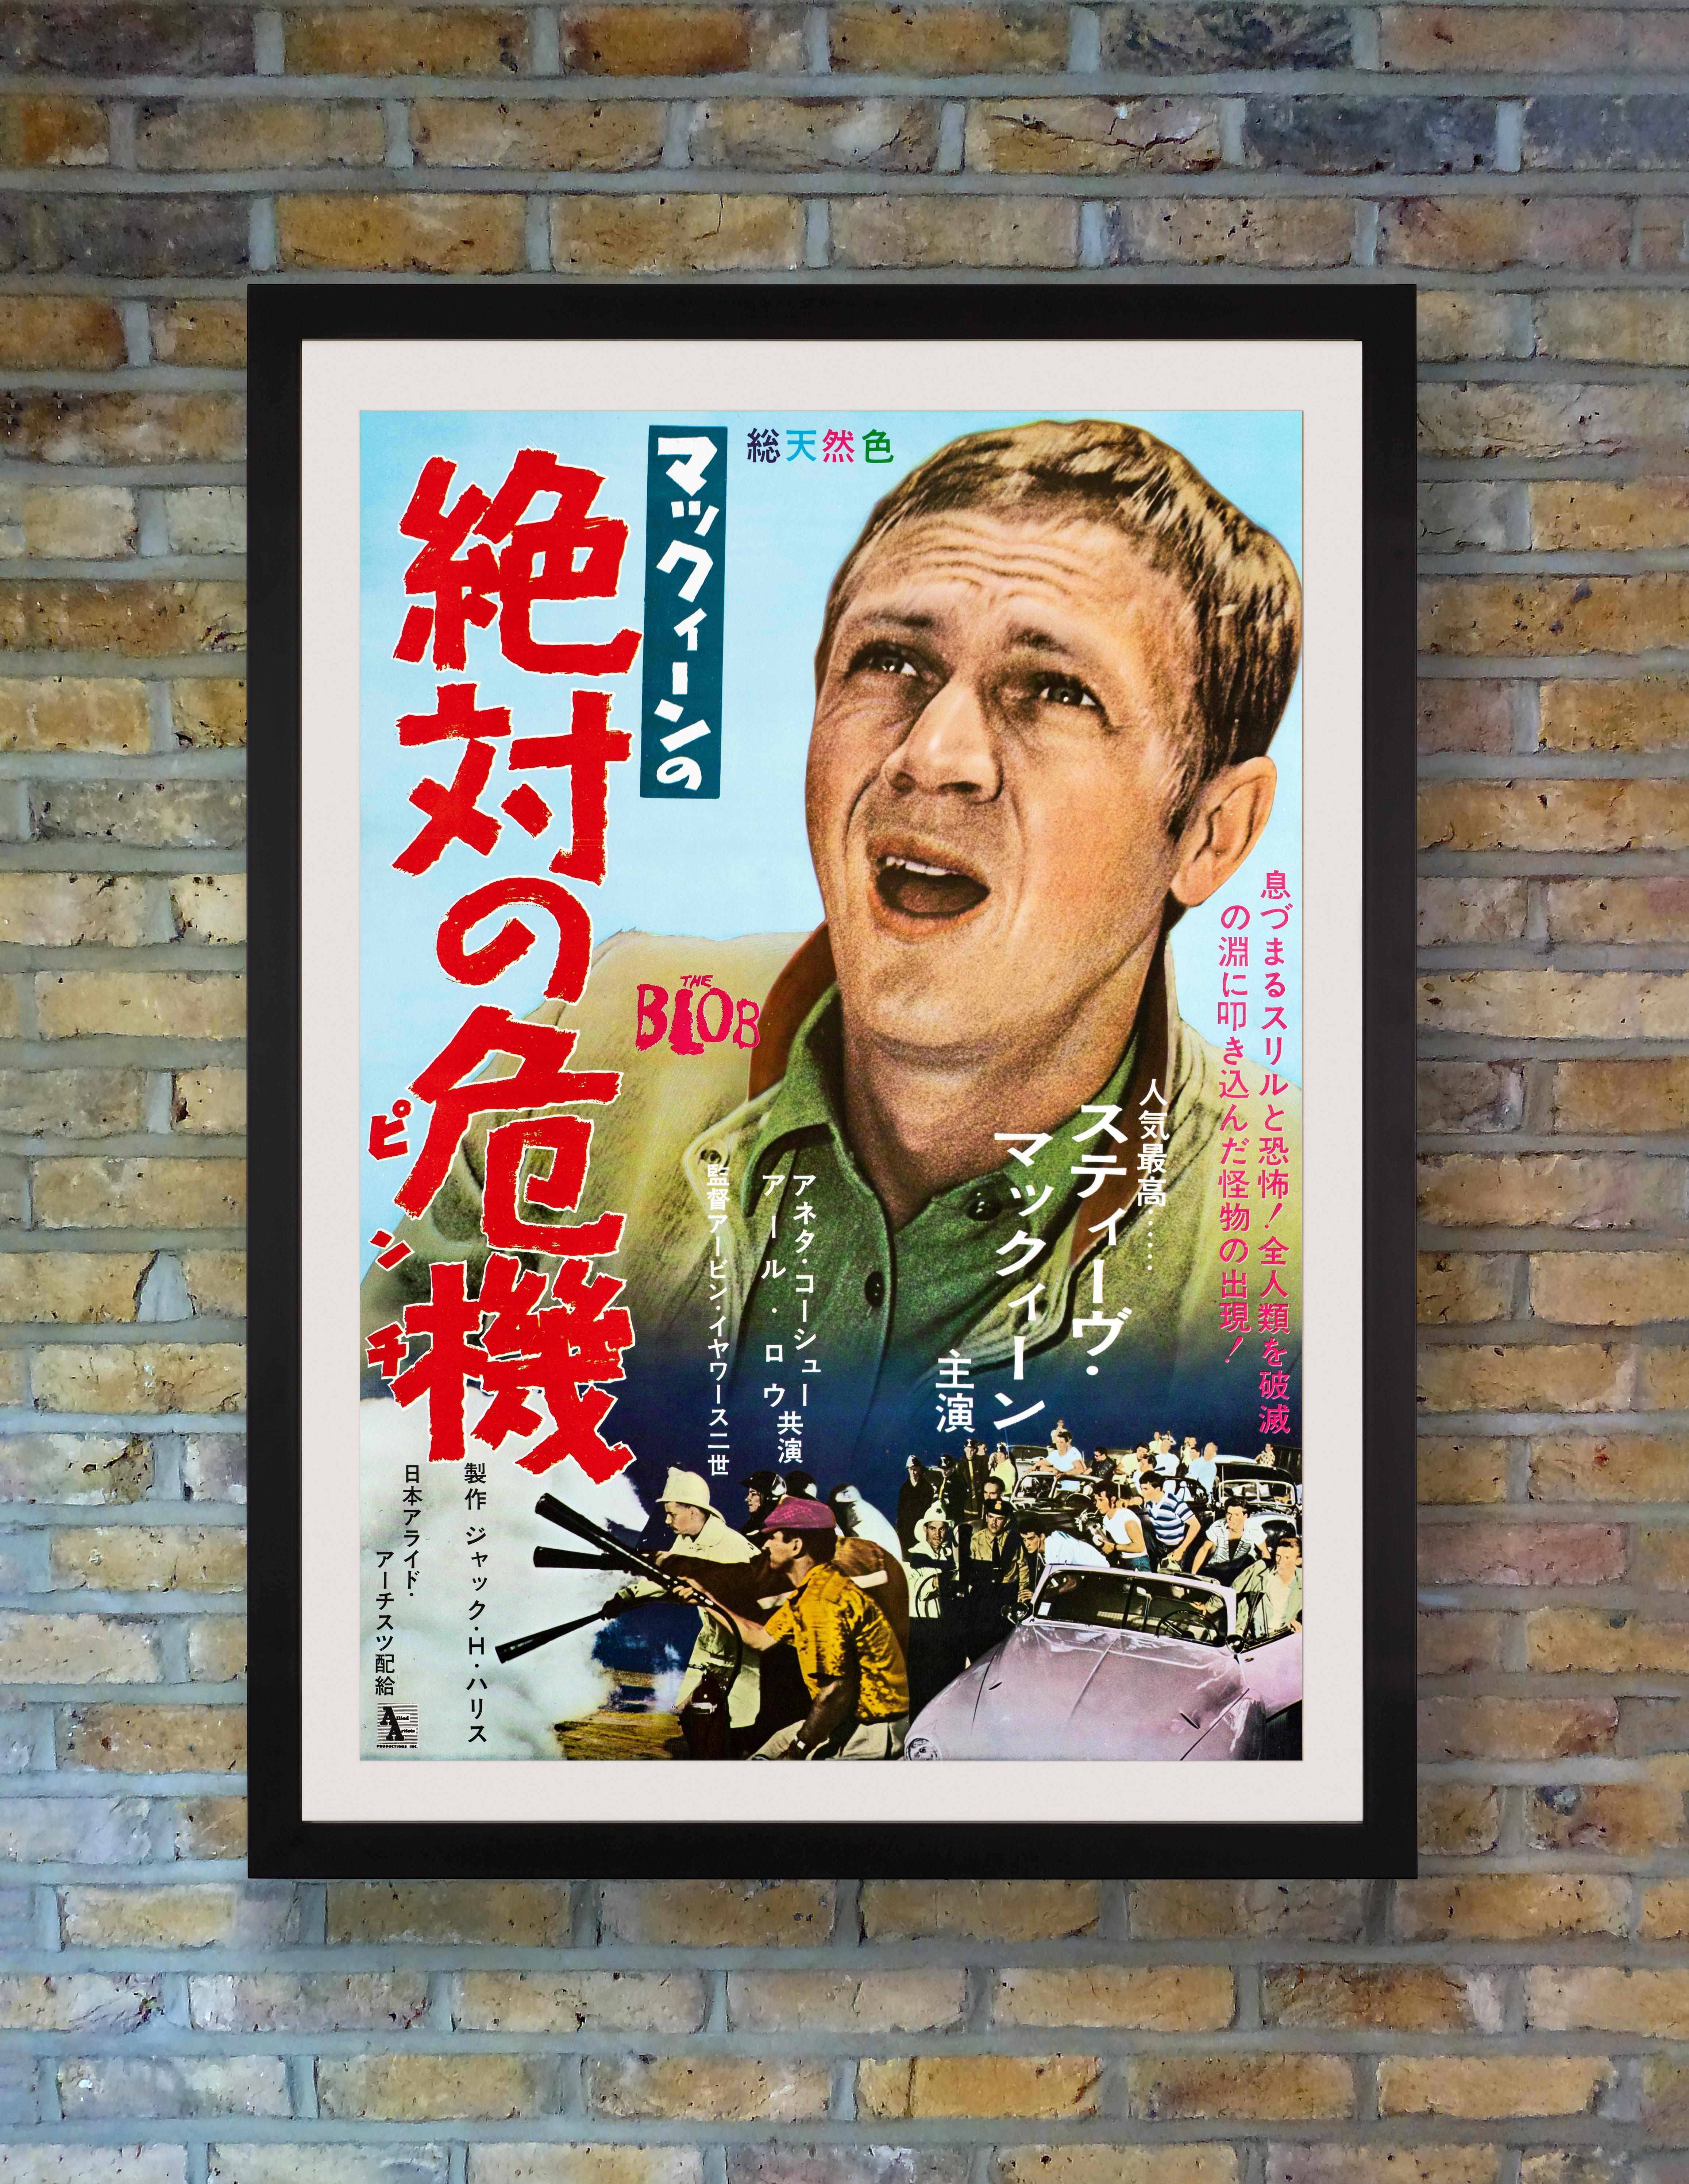 A young Steve McQueen is pitched as the main event on this incredibly rare B2 poster for the first Japanese release of the cult drive-in era classic ‘The Blob’ in 1965, cashing in on the king of cool’s box office draw at the height of his